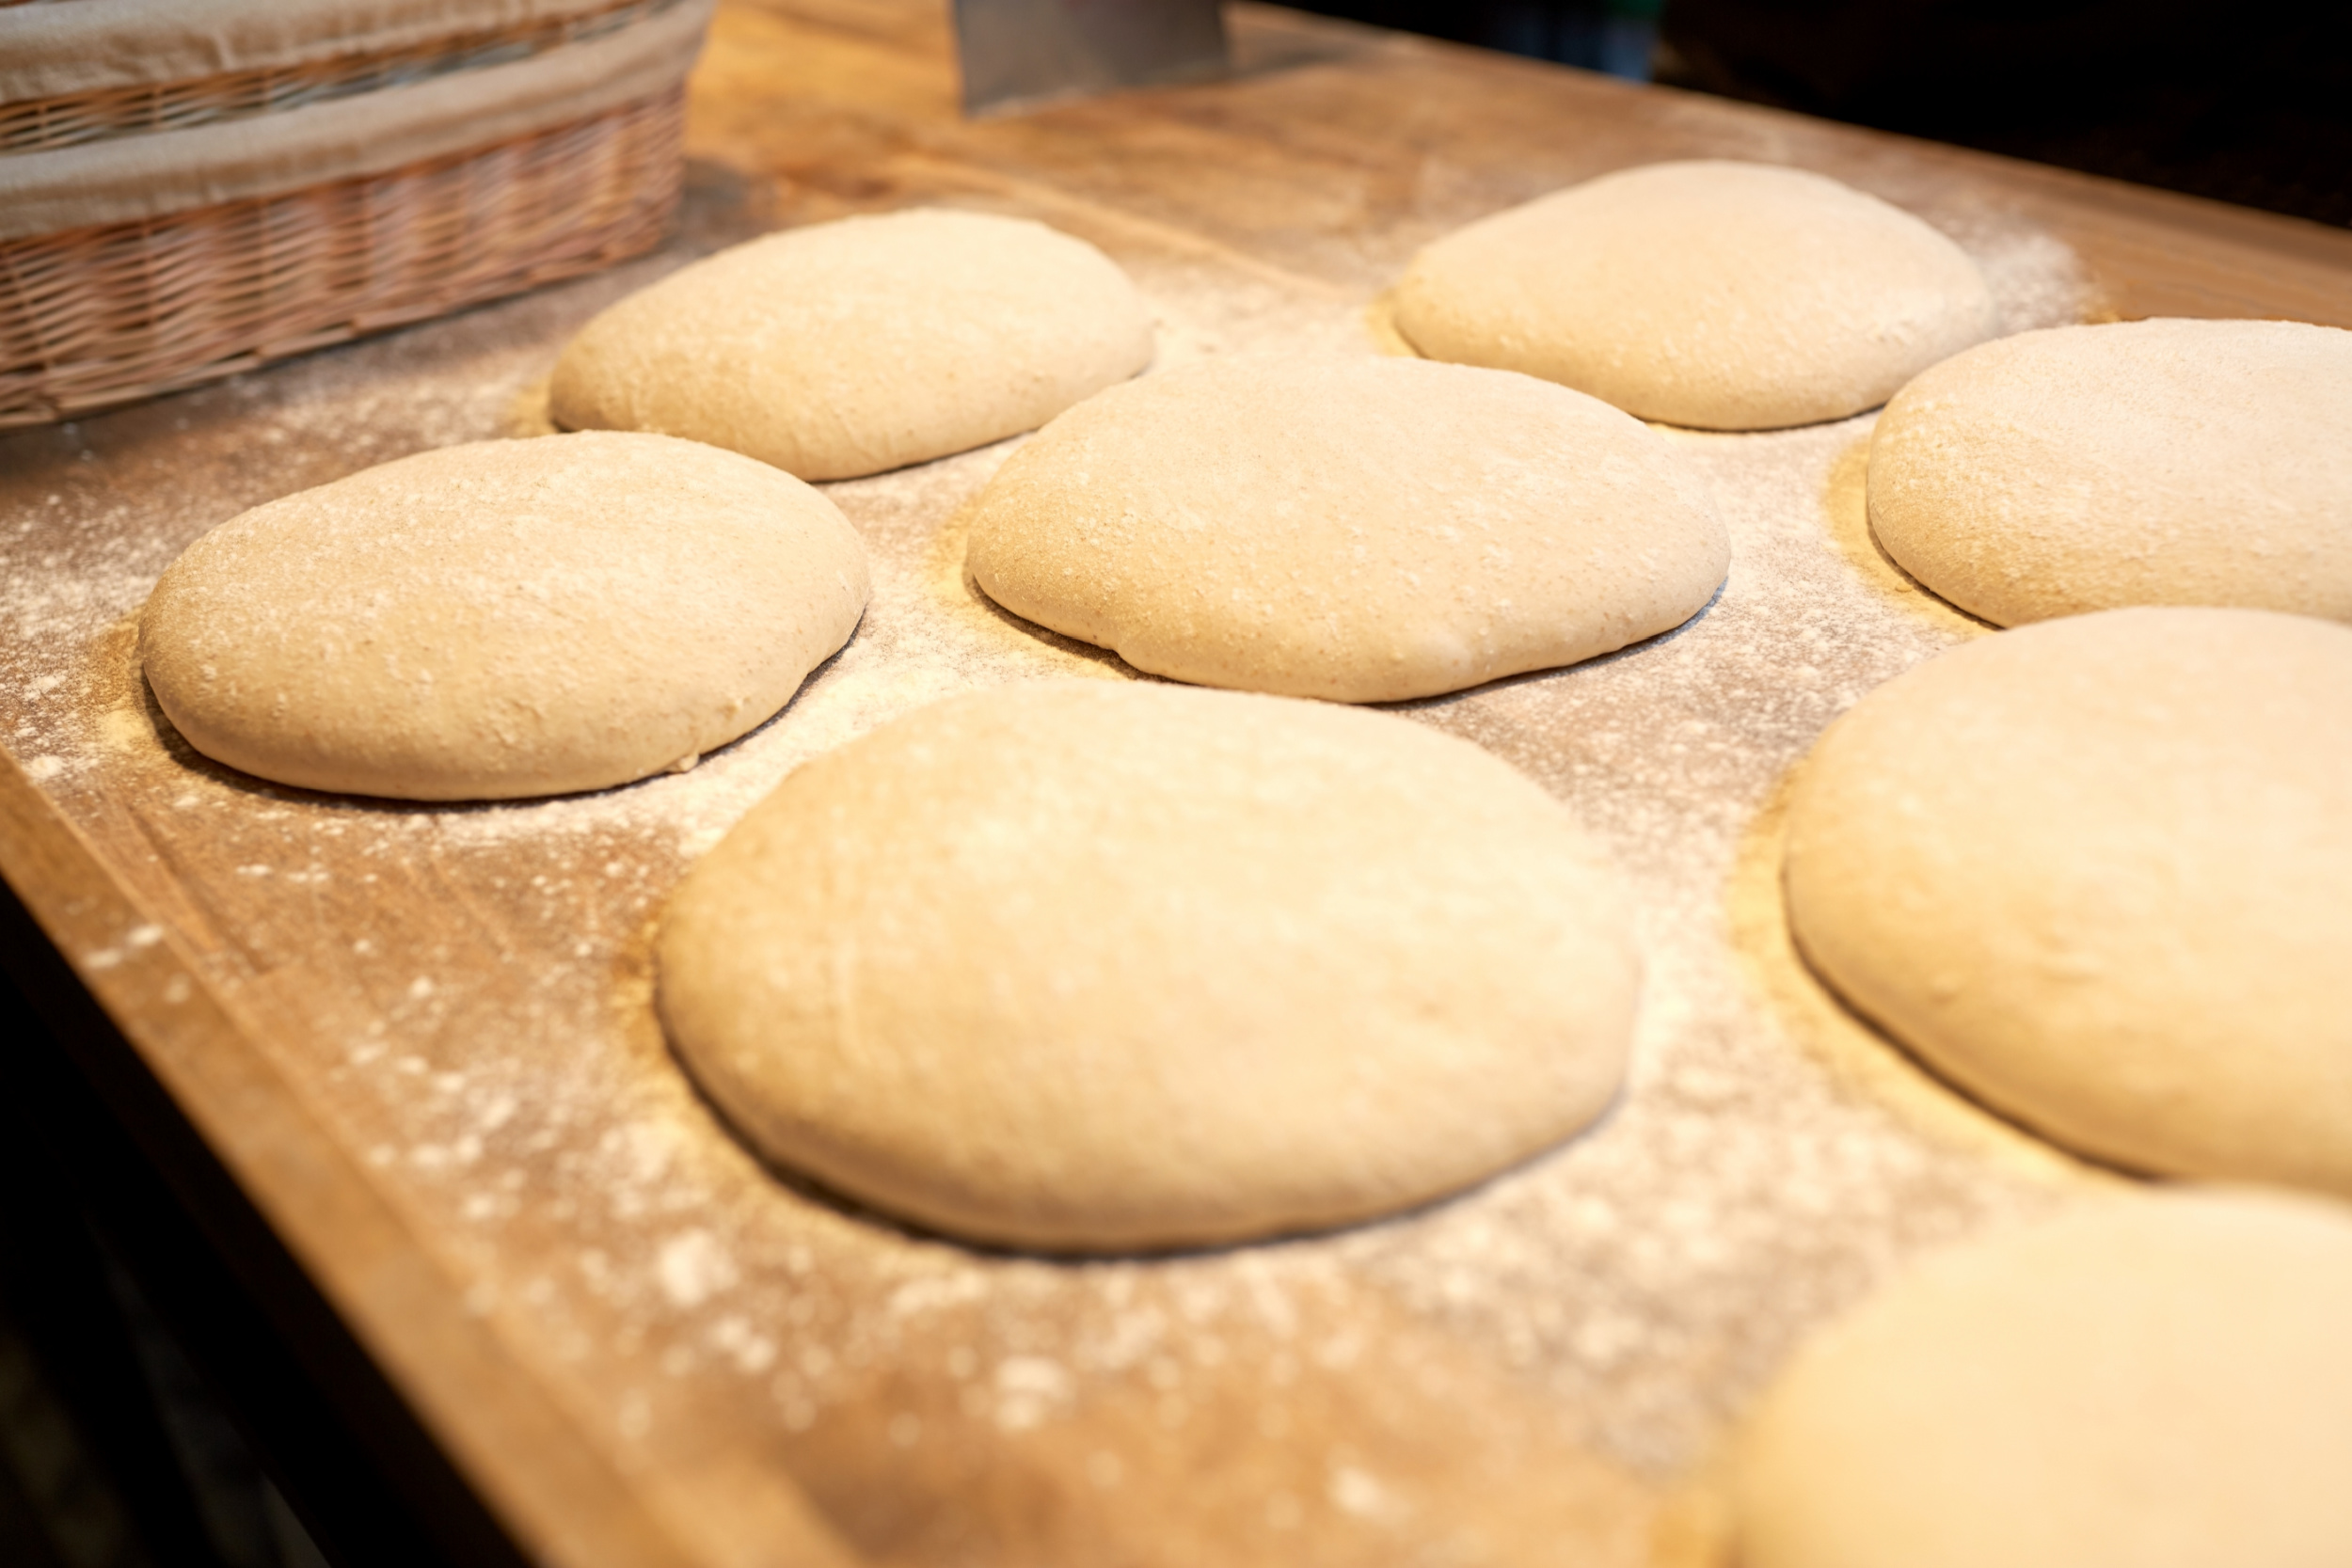 Unbaked yeast bread dough shaped into rounds and resting on a floured surface, ready for freezing.